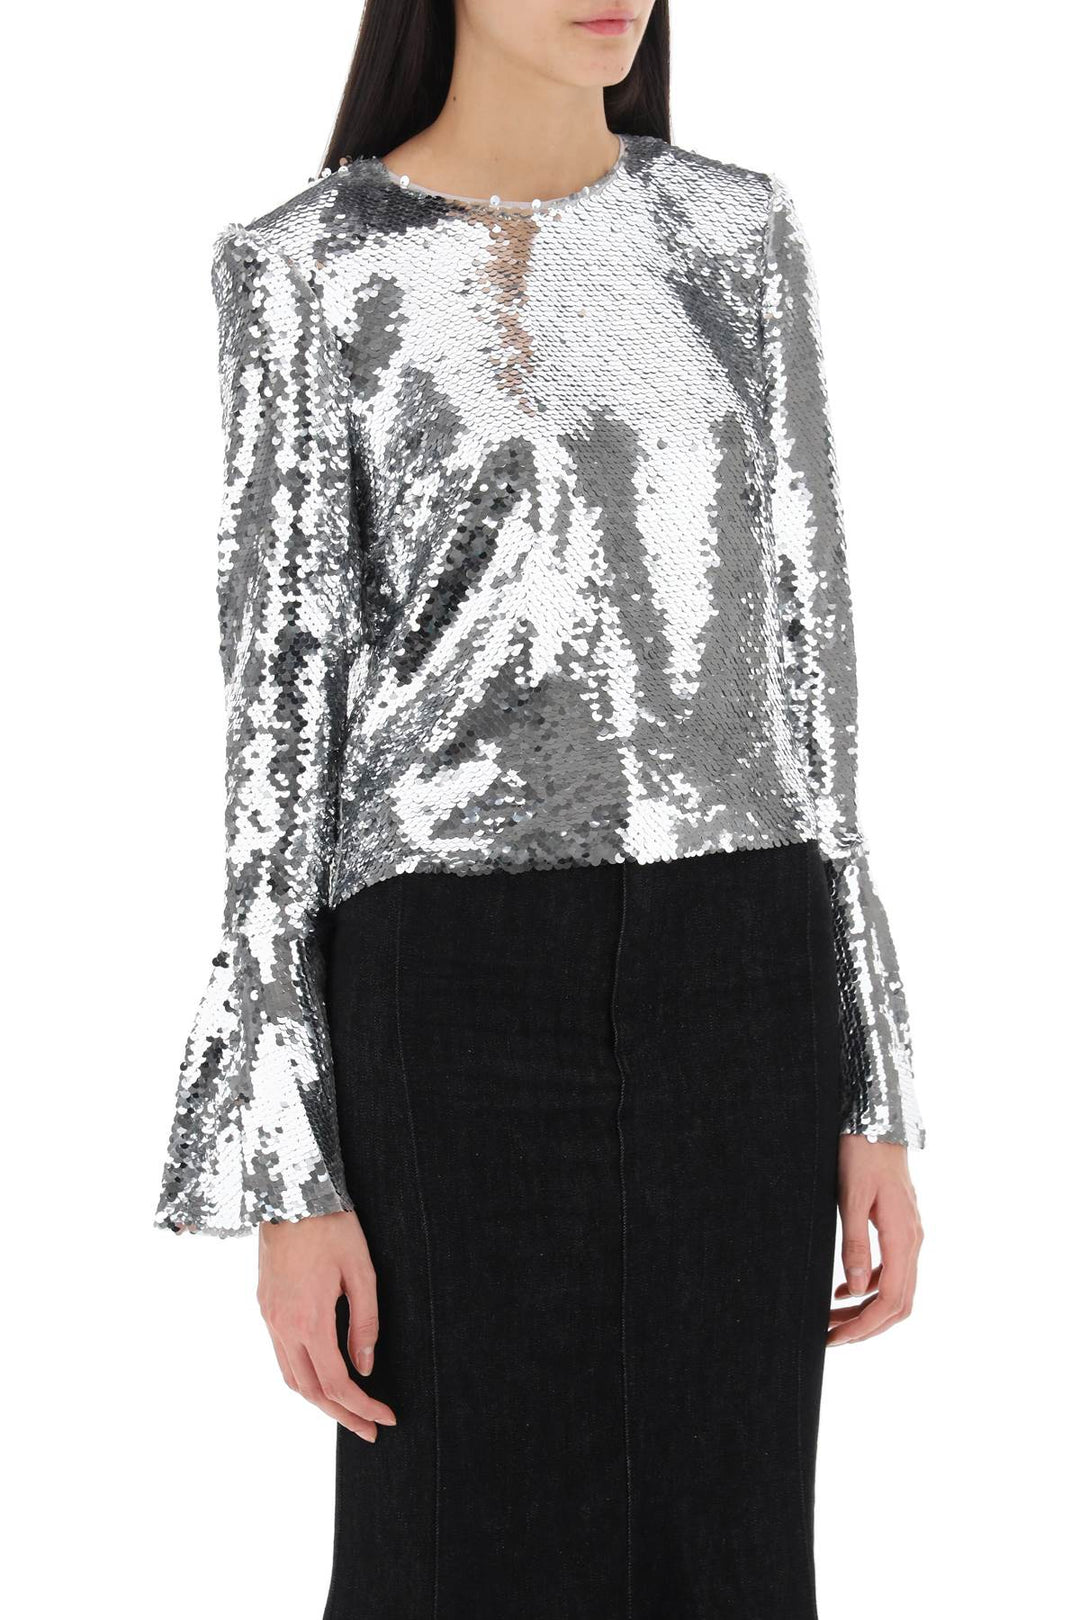 Self Portrait Sequined Cropped Top   Argento